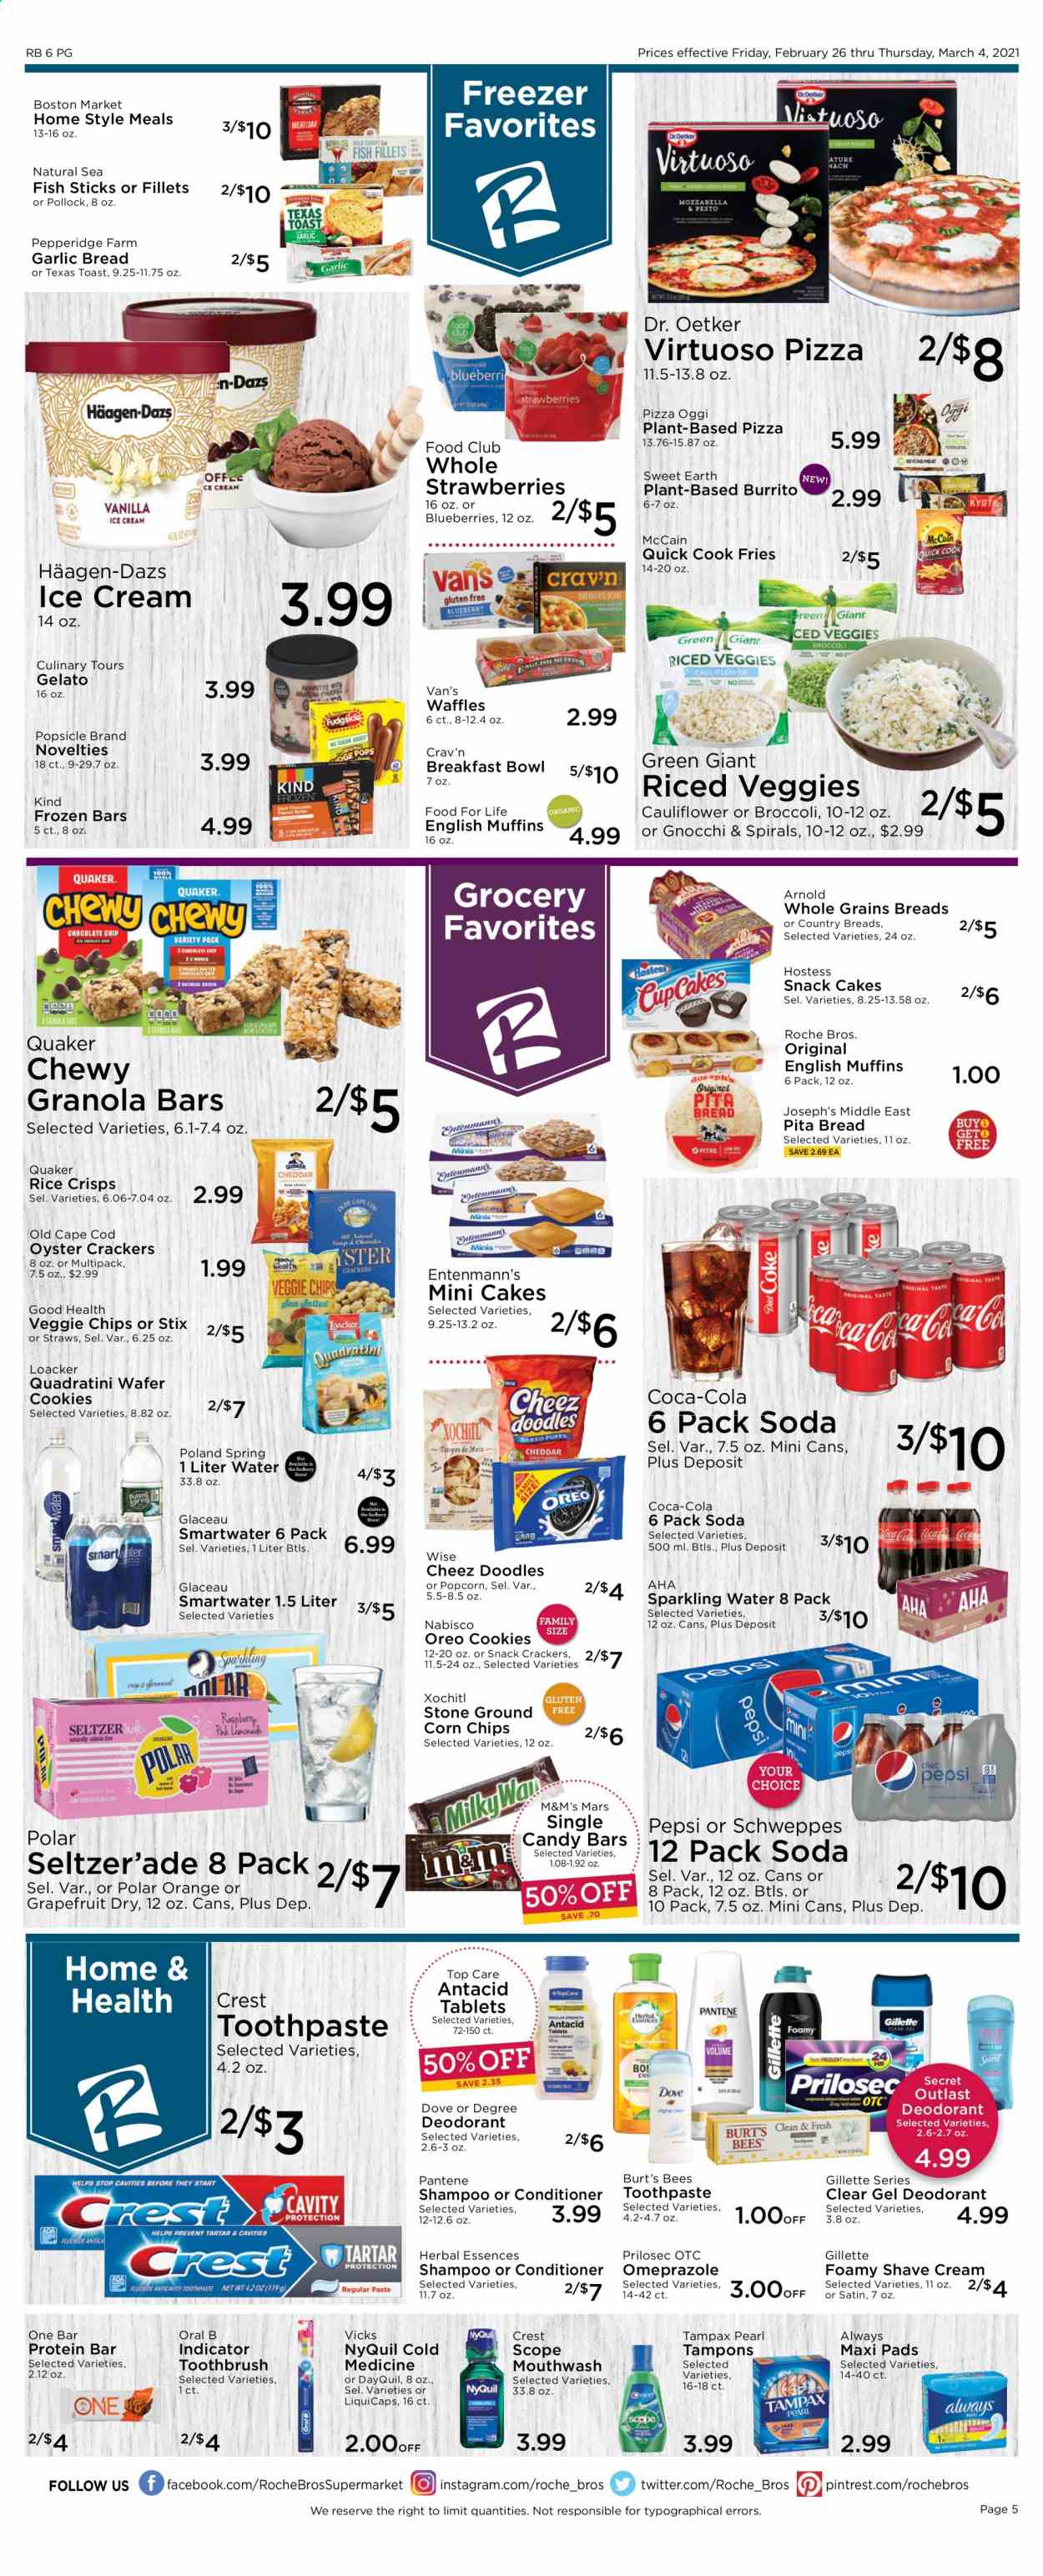 thumbnail - Roche Bros. Flyer - 02/26/2021 - 03/04/2021 - Sales products - blueberries, bread, pita, toast bread, cake, muffin, waffles, Entenmann's, oranges, cod, pollock, fish, english muffins, gnocchi, pizza, breakfast bowl, burrito, Quaker, fish sticks, Dr. Oetker, Oreo, ice cream, Häagen-Dazs, gelato, cauliflower, strawberries, McCain, potato fries, cookies, wafers, Mars, M&M's, crackers, snack, corn chips, popcorn, oyster crackers, rice crisps, protein bar, granola bar, rice, Coca-Cola, Schweppes, Pepsi, soda, seltzer water, sparkling water, Dove, shampoo, toothbrush, Oral-B, toothpaste, mouthwash, Crest, Tampax, sanitary pads, tampons, conditioner, Pantene, Herbal Essences, anti-perspirant, deodorant, Gillette, shave cream, Vicks, DayQuil, NyQuil, Antacid. Page 5.